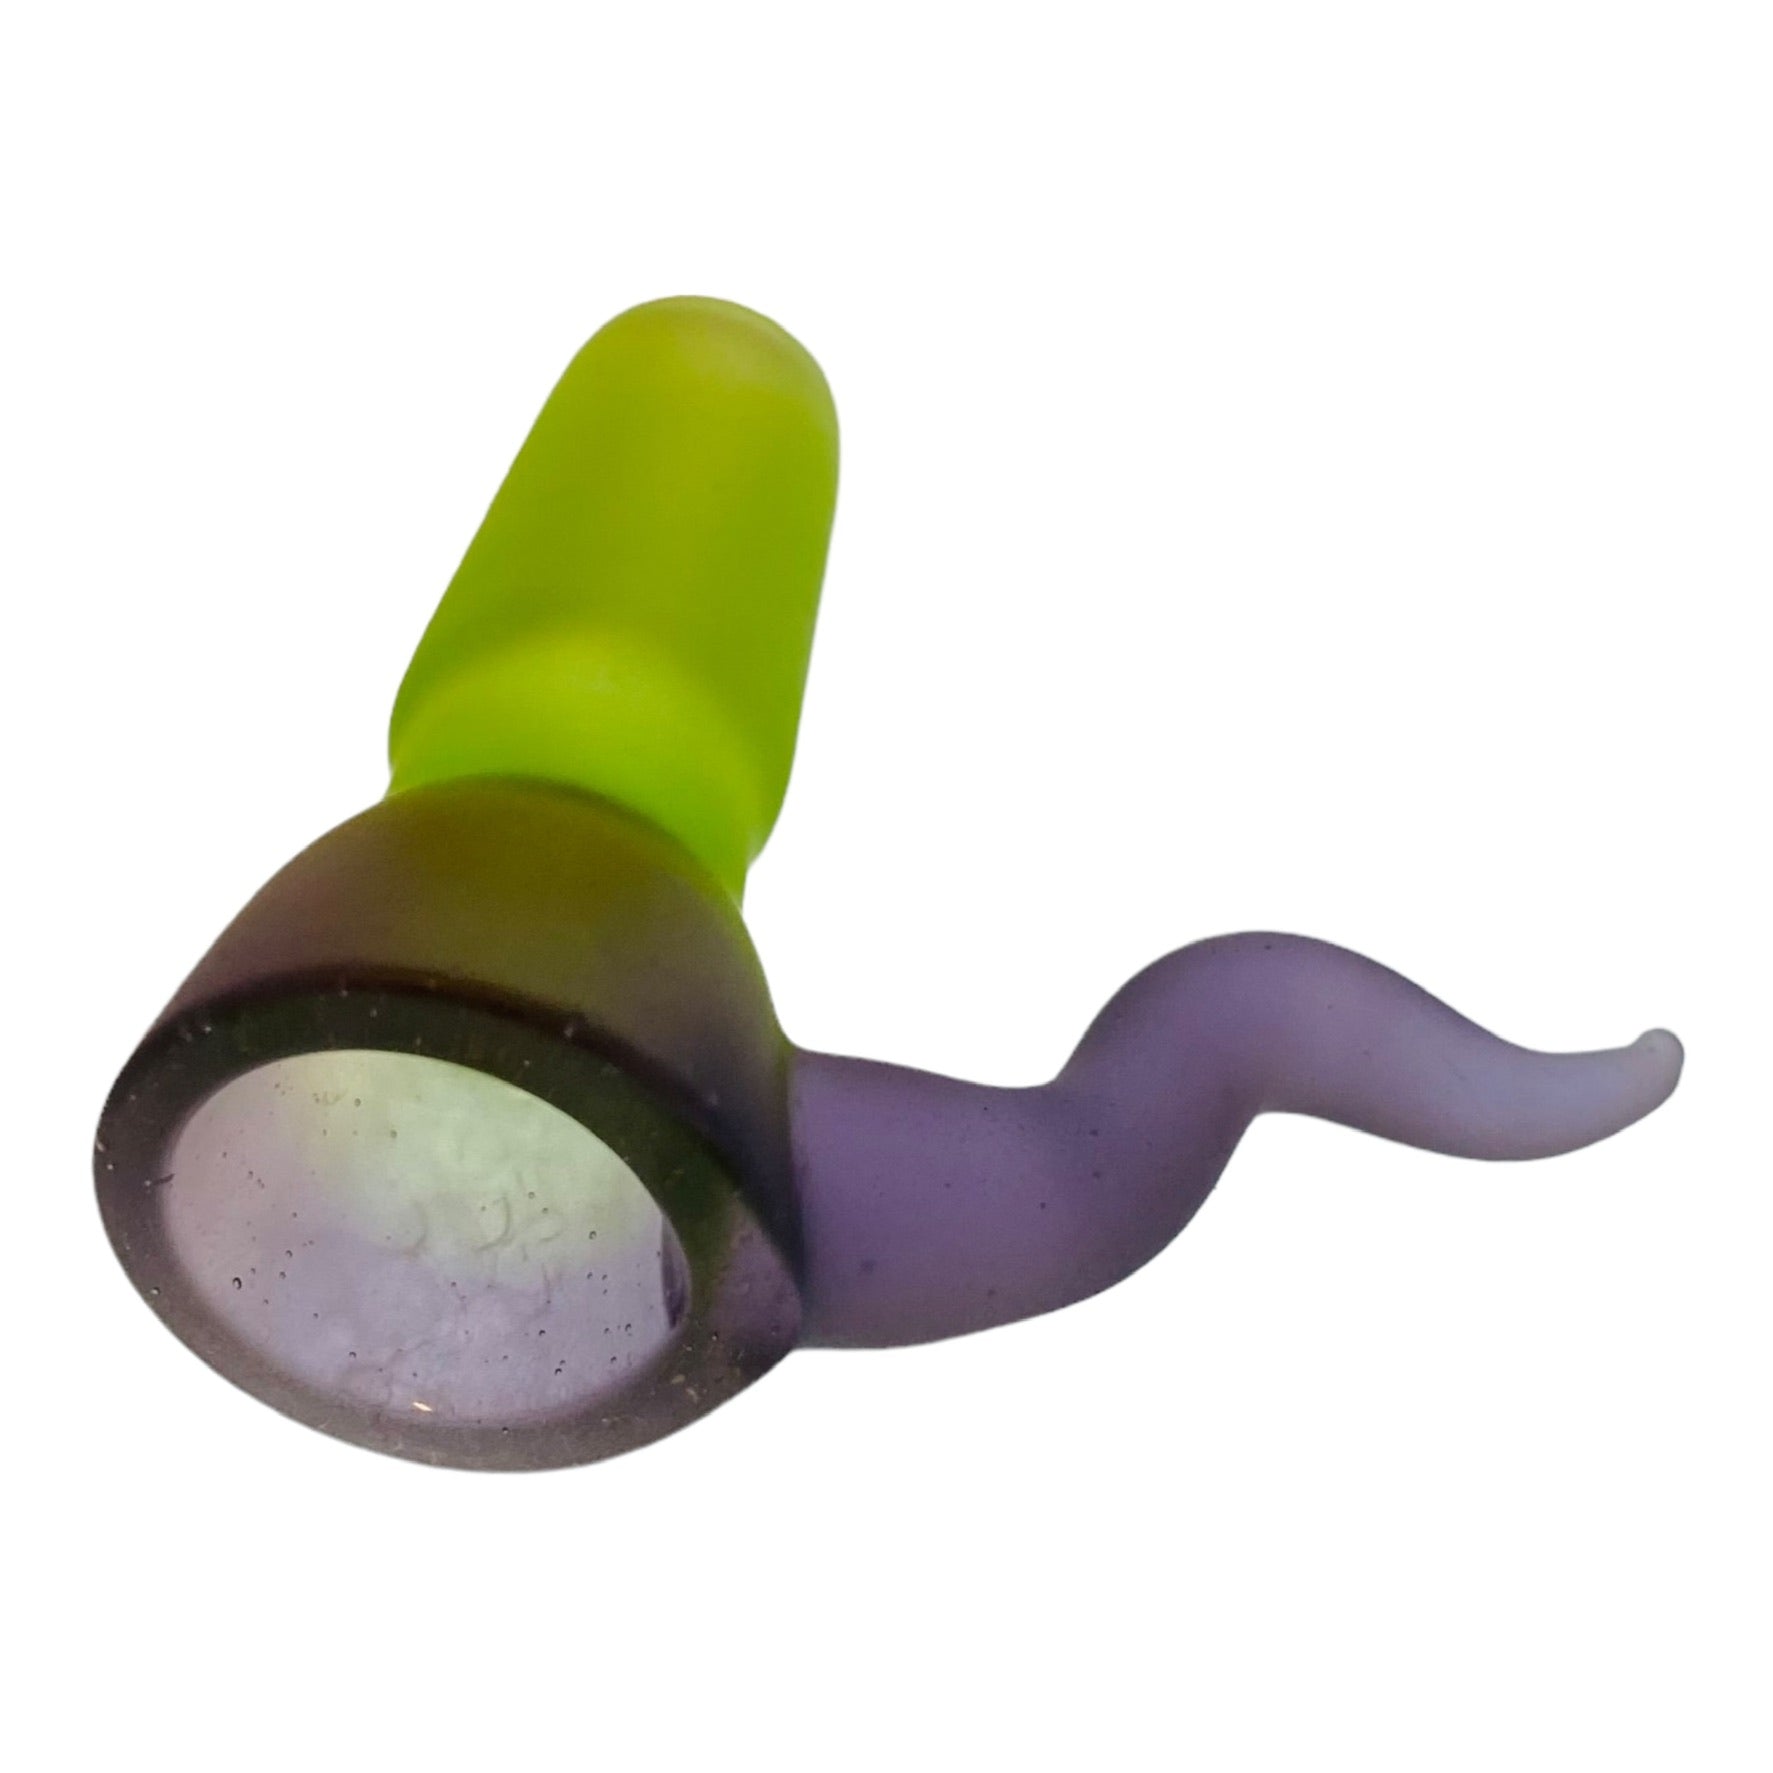 Optera Glass - Sandblasted Green And Purple With Purple Handle - 14mm Bowl Piece